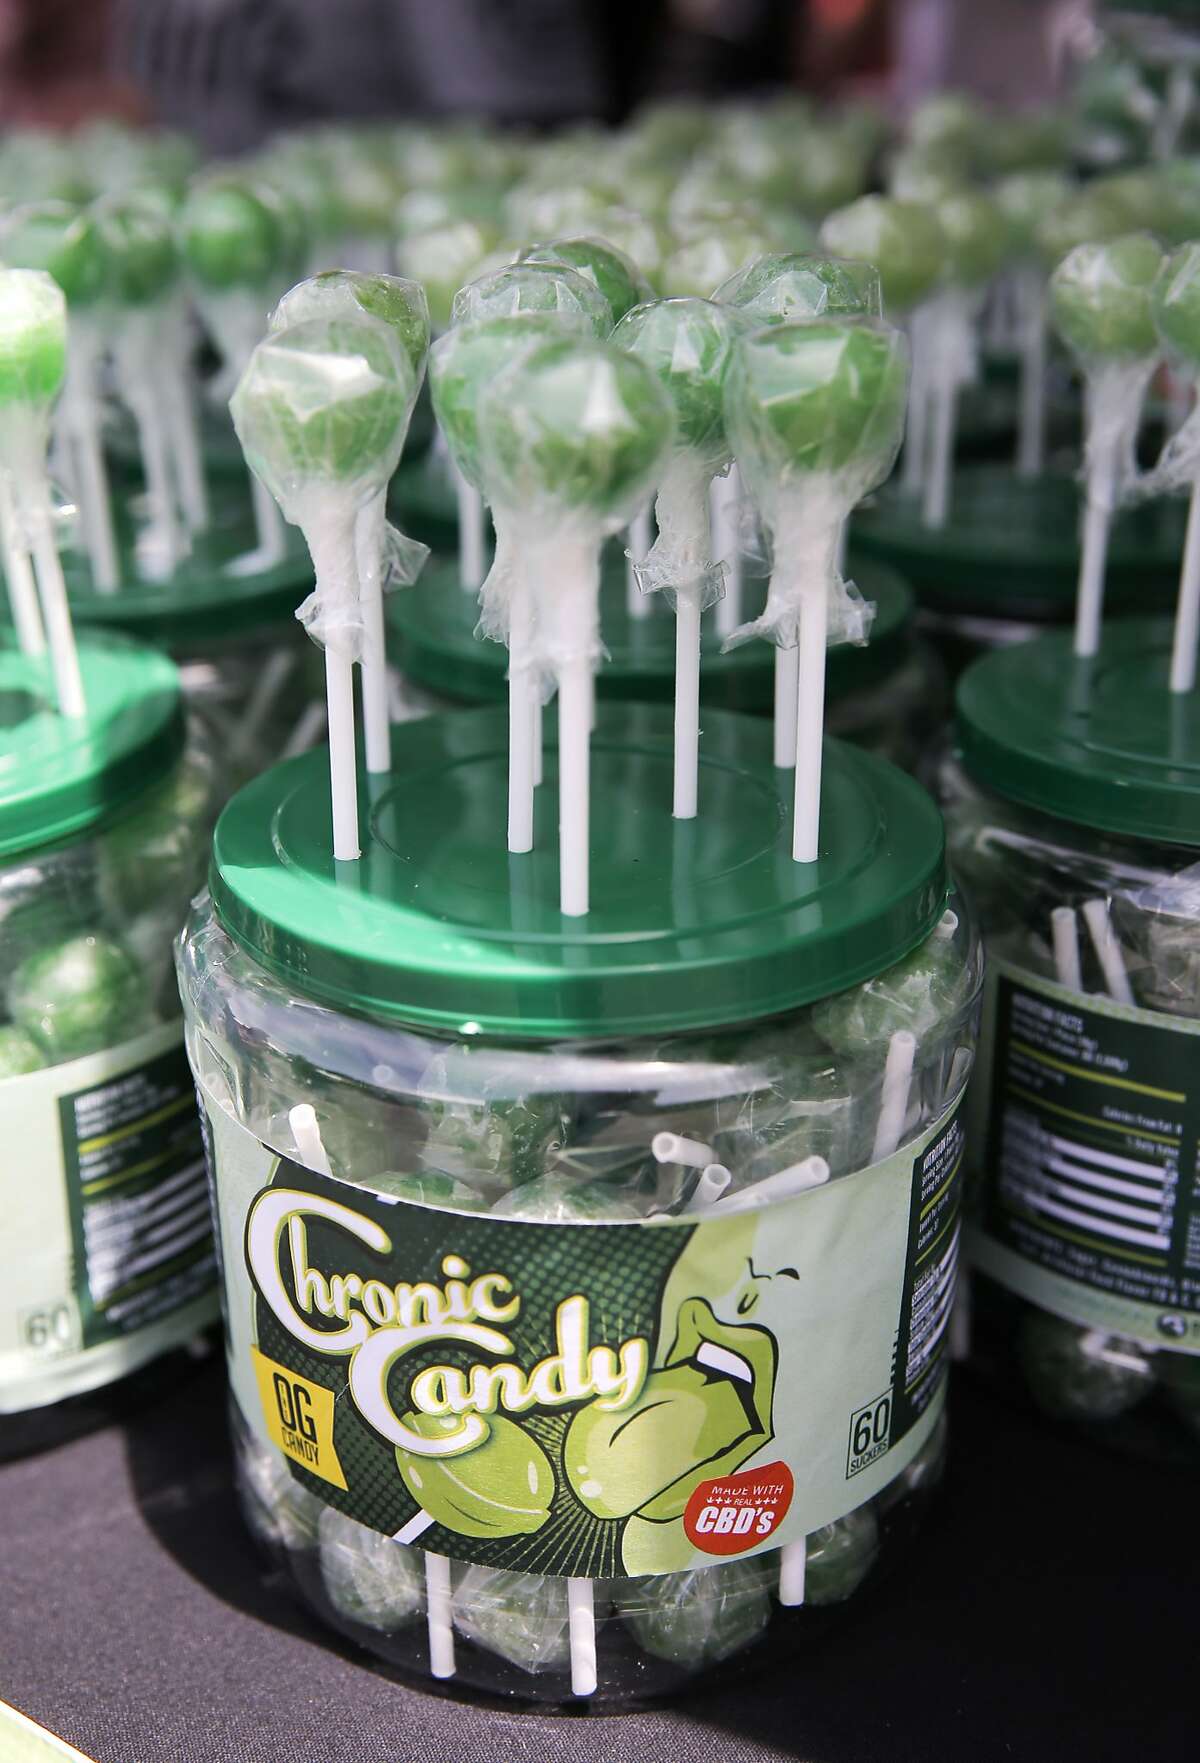 Chronic Candy displays their medicated pops during the event as vendors gathered for Cannabis Cup, the world's largest marijuana trade show taking place at the Cow Palace in San Francisco, Calif. on Sat. June 20, 2015.